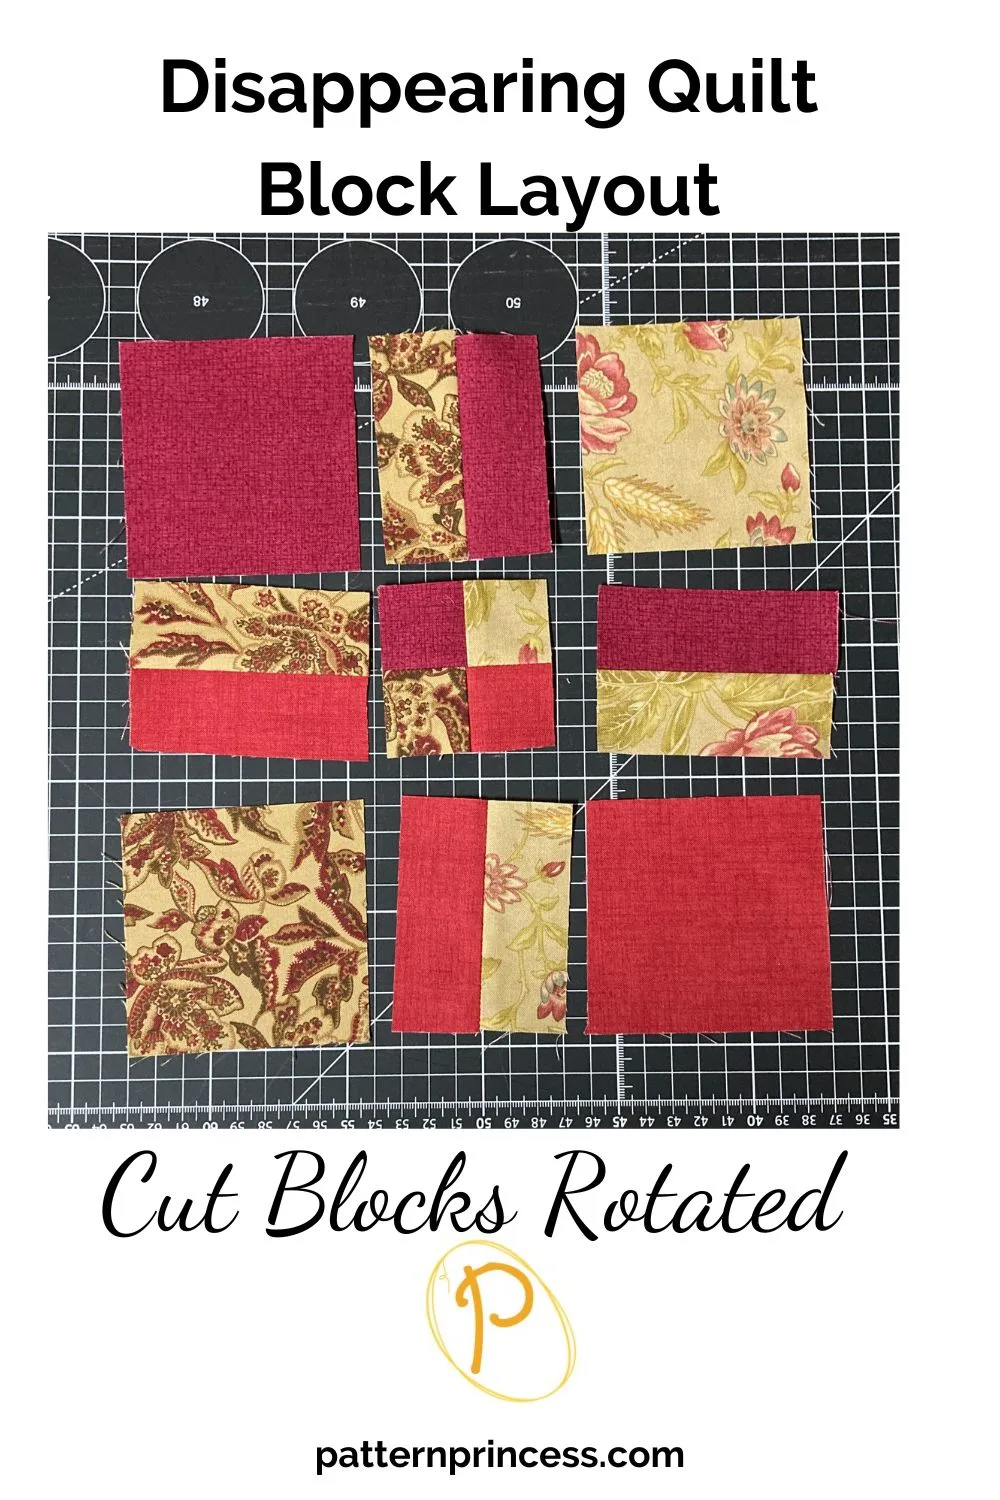 Disappearing Quilt Block Layout